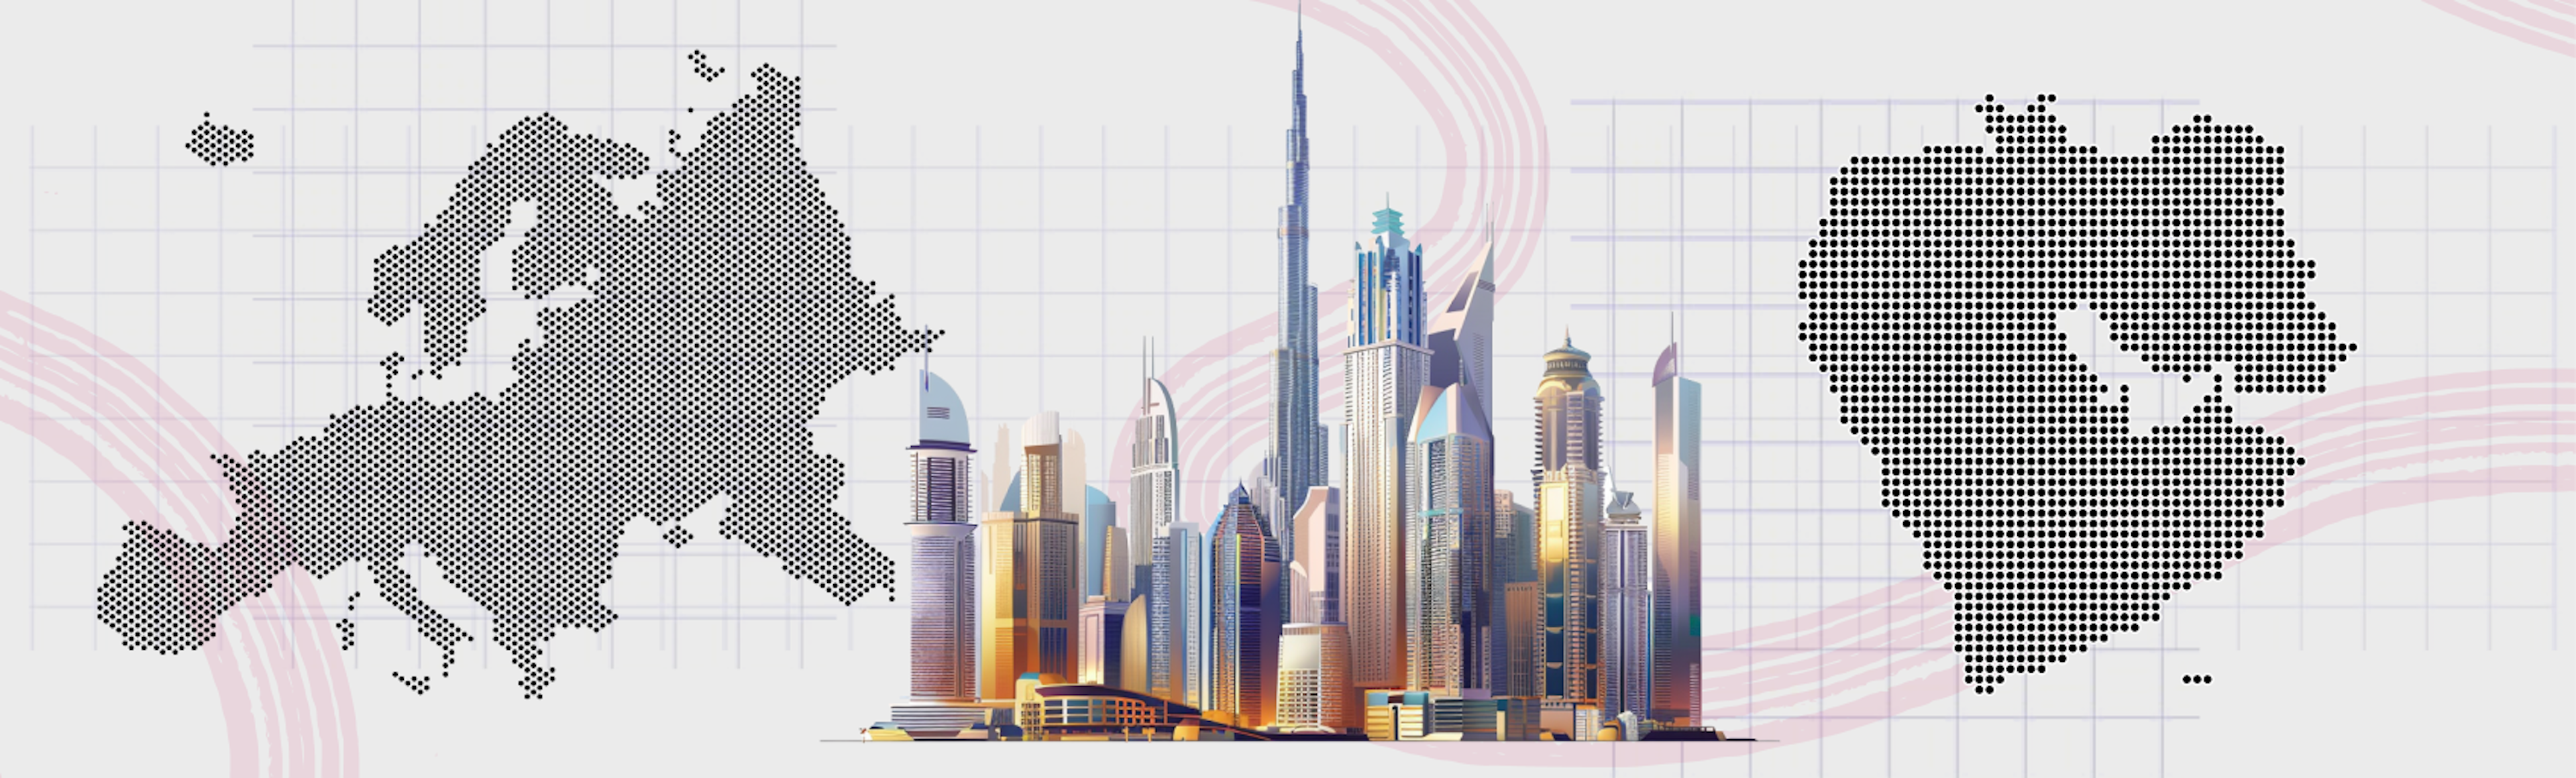 An illustration of the Dubai skyline with maps of Europe and the Gulf region.